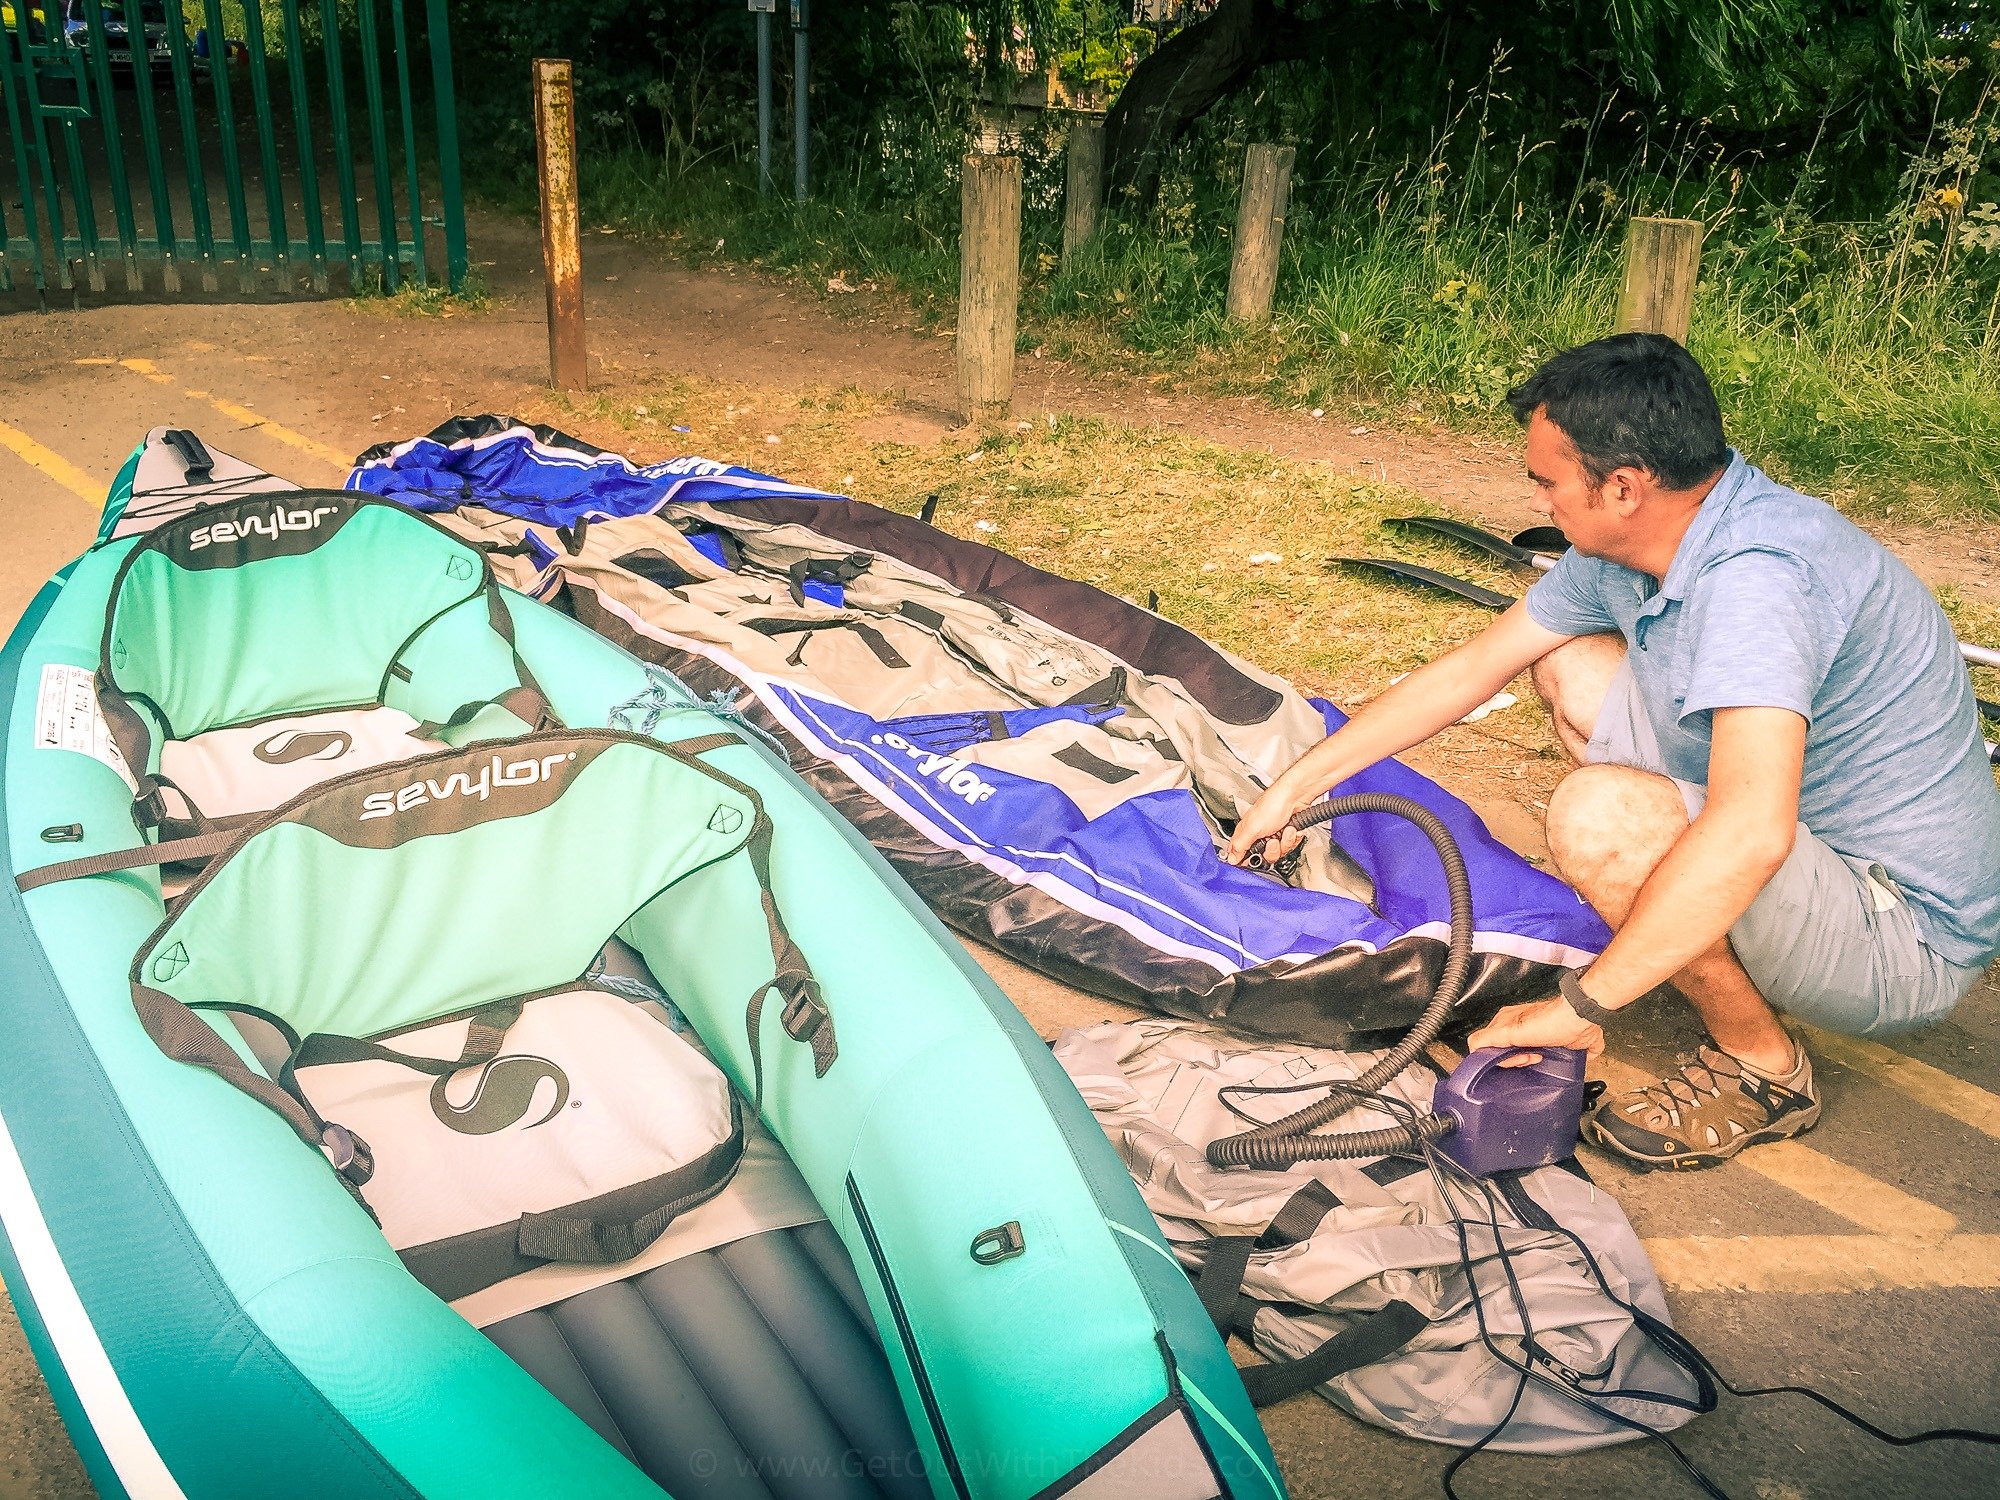 Inflating canoes with the pump